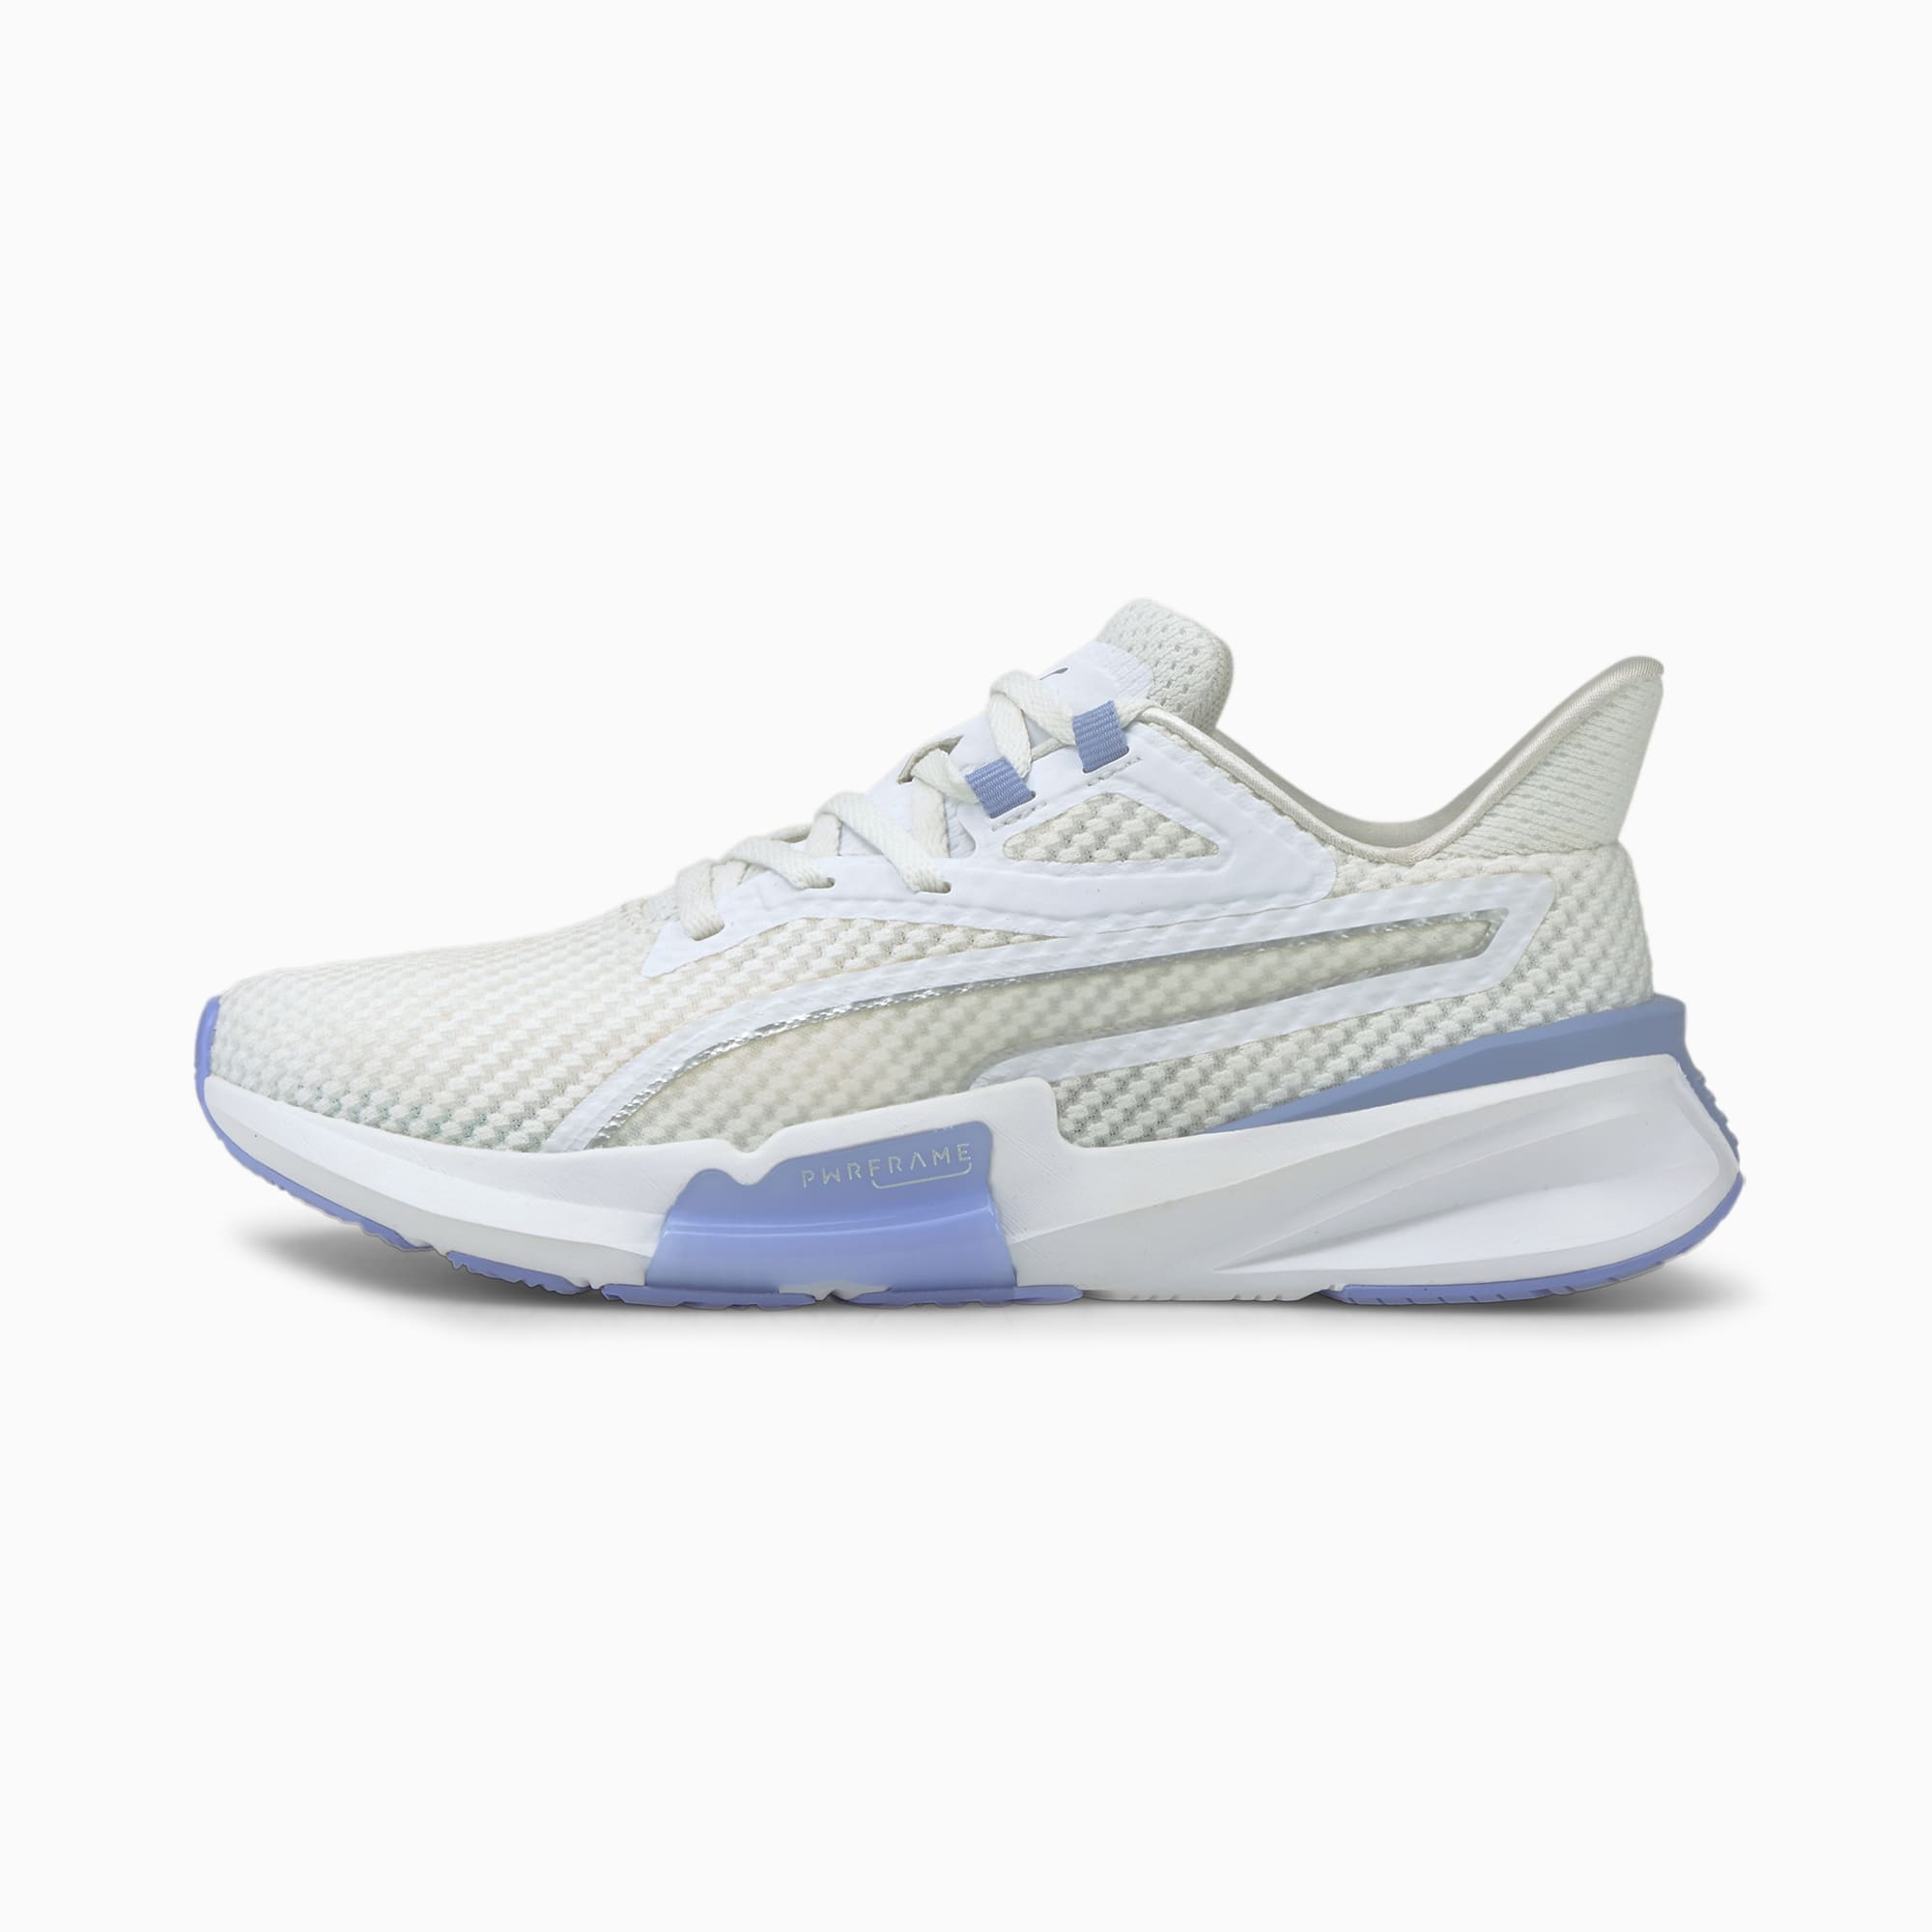 PUMA Pwrframe Tr Training Shoes Women, White/Easter Egg, Size 35,5, Shoes